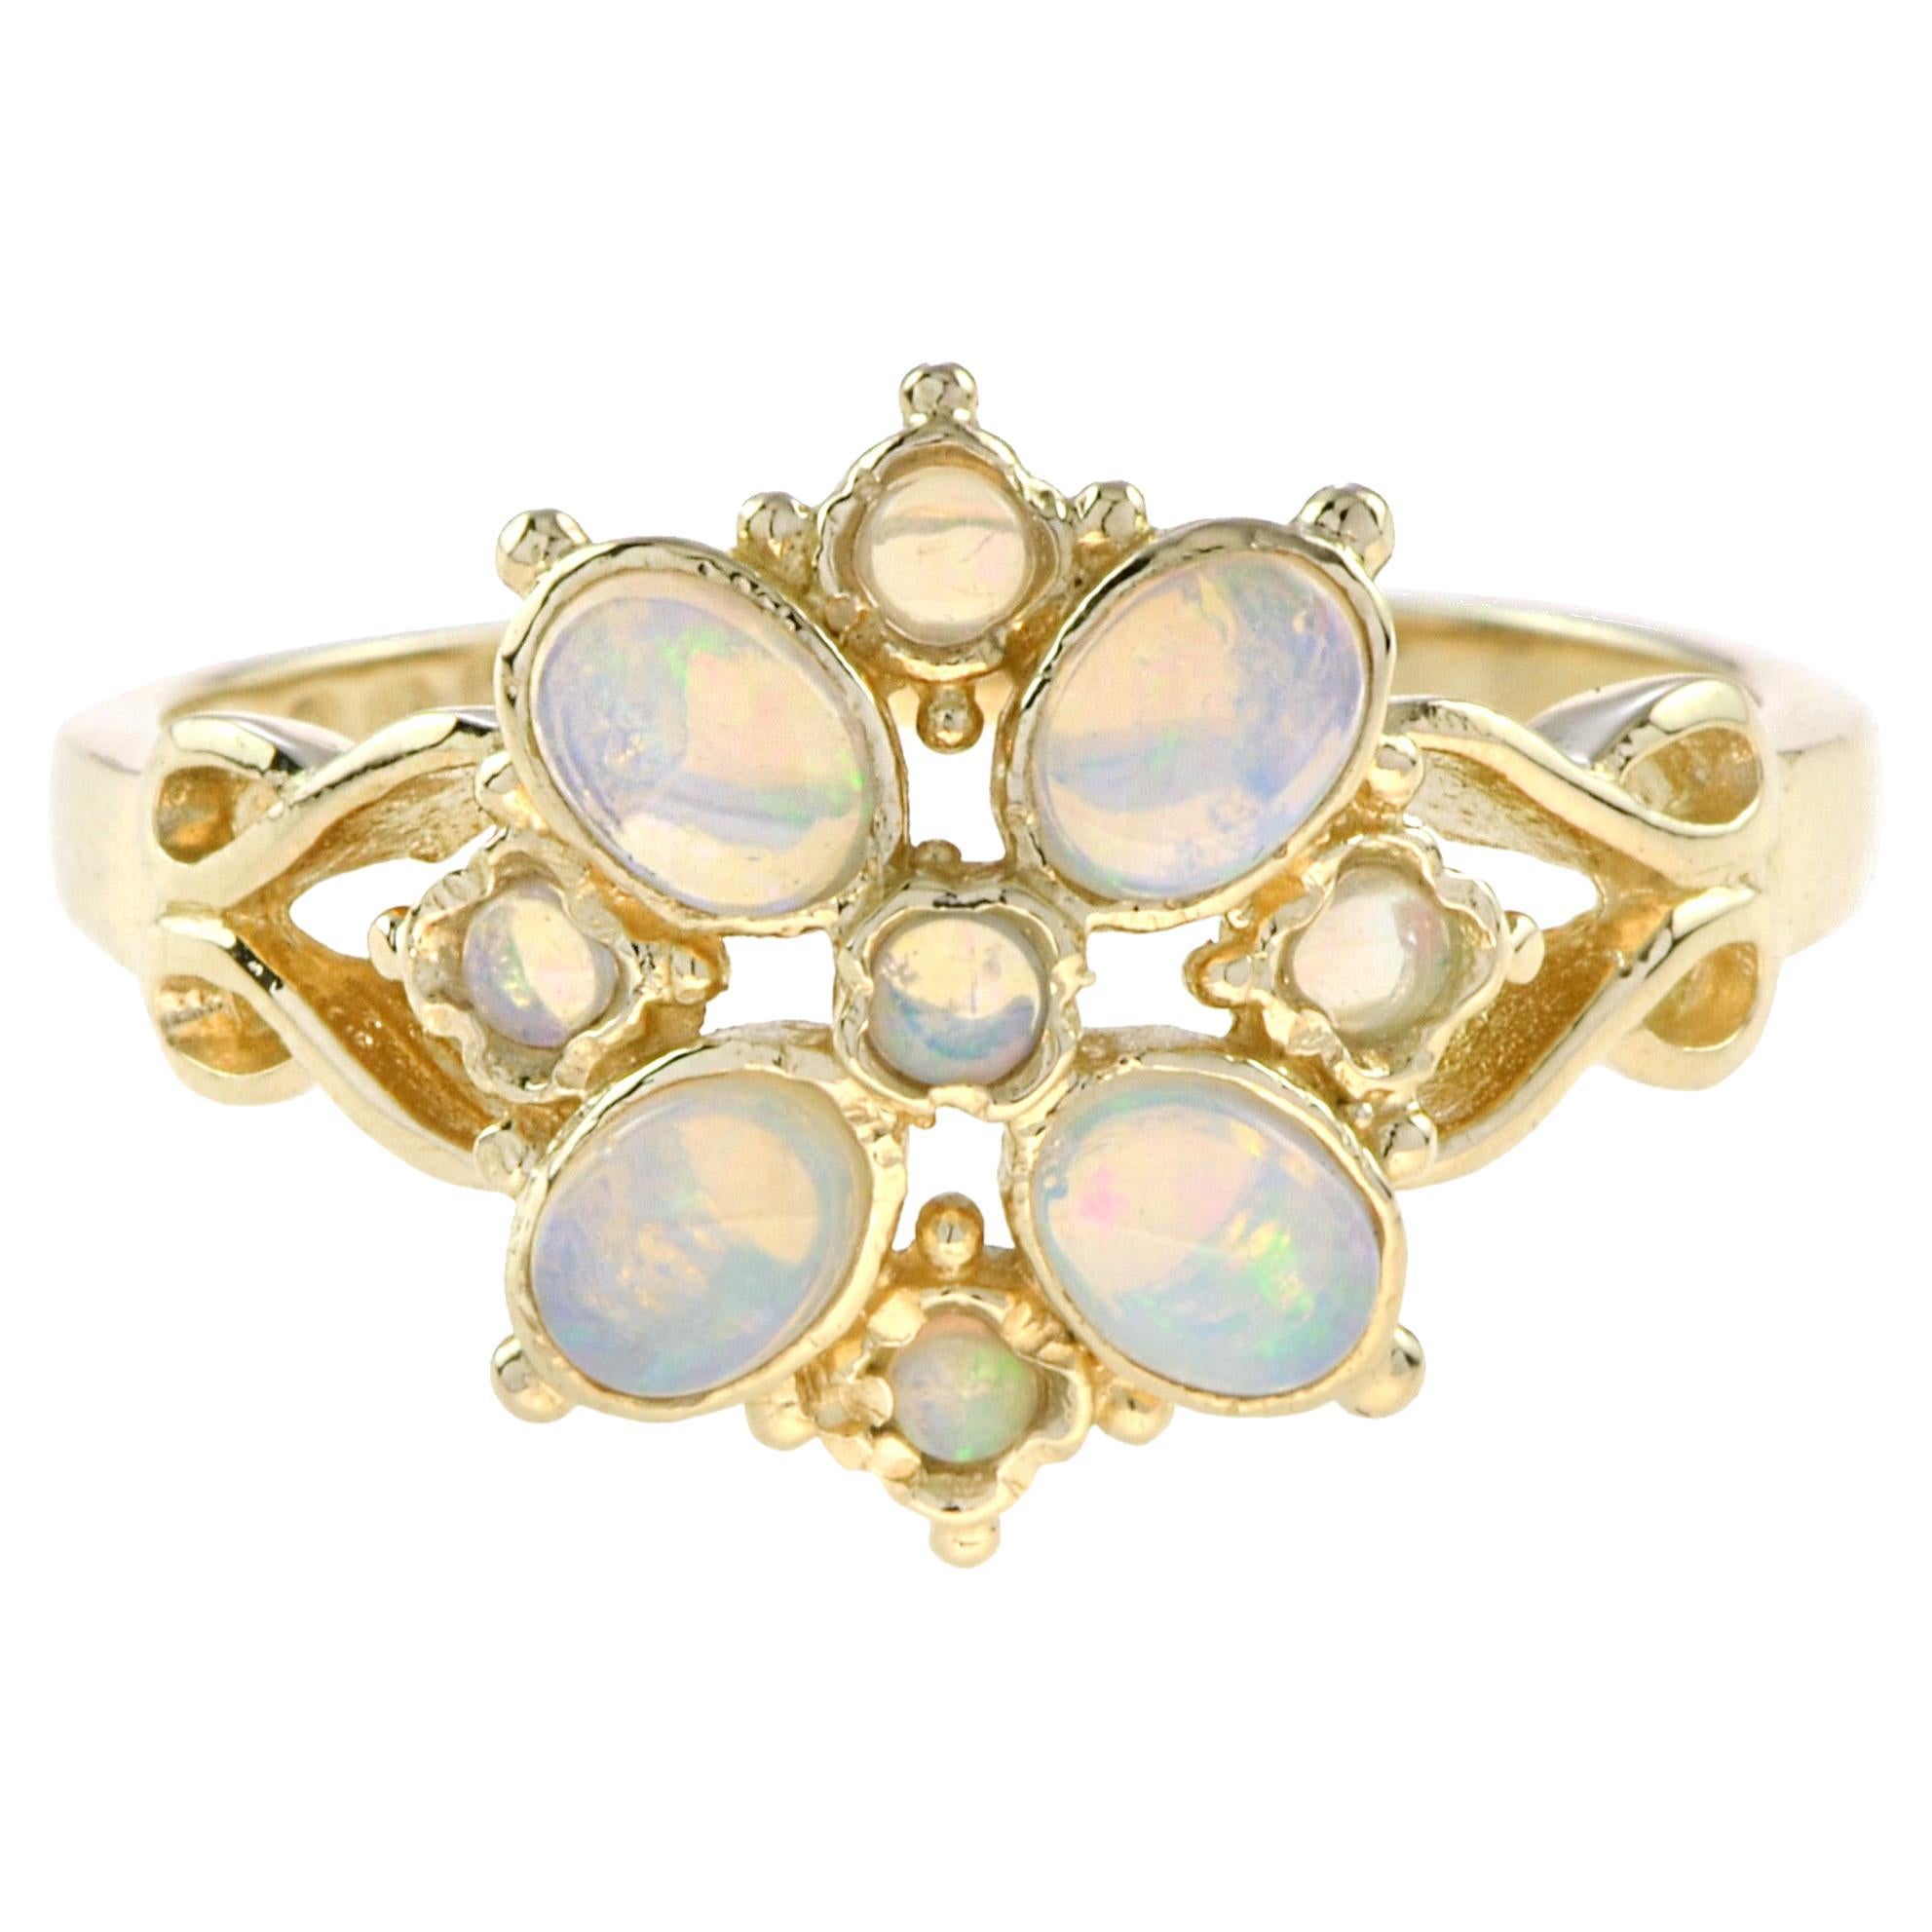 For Sale:  Vintage Style Natural Opal Flower Ring in 14K Yellow Gold